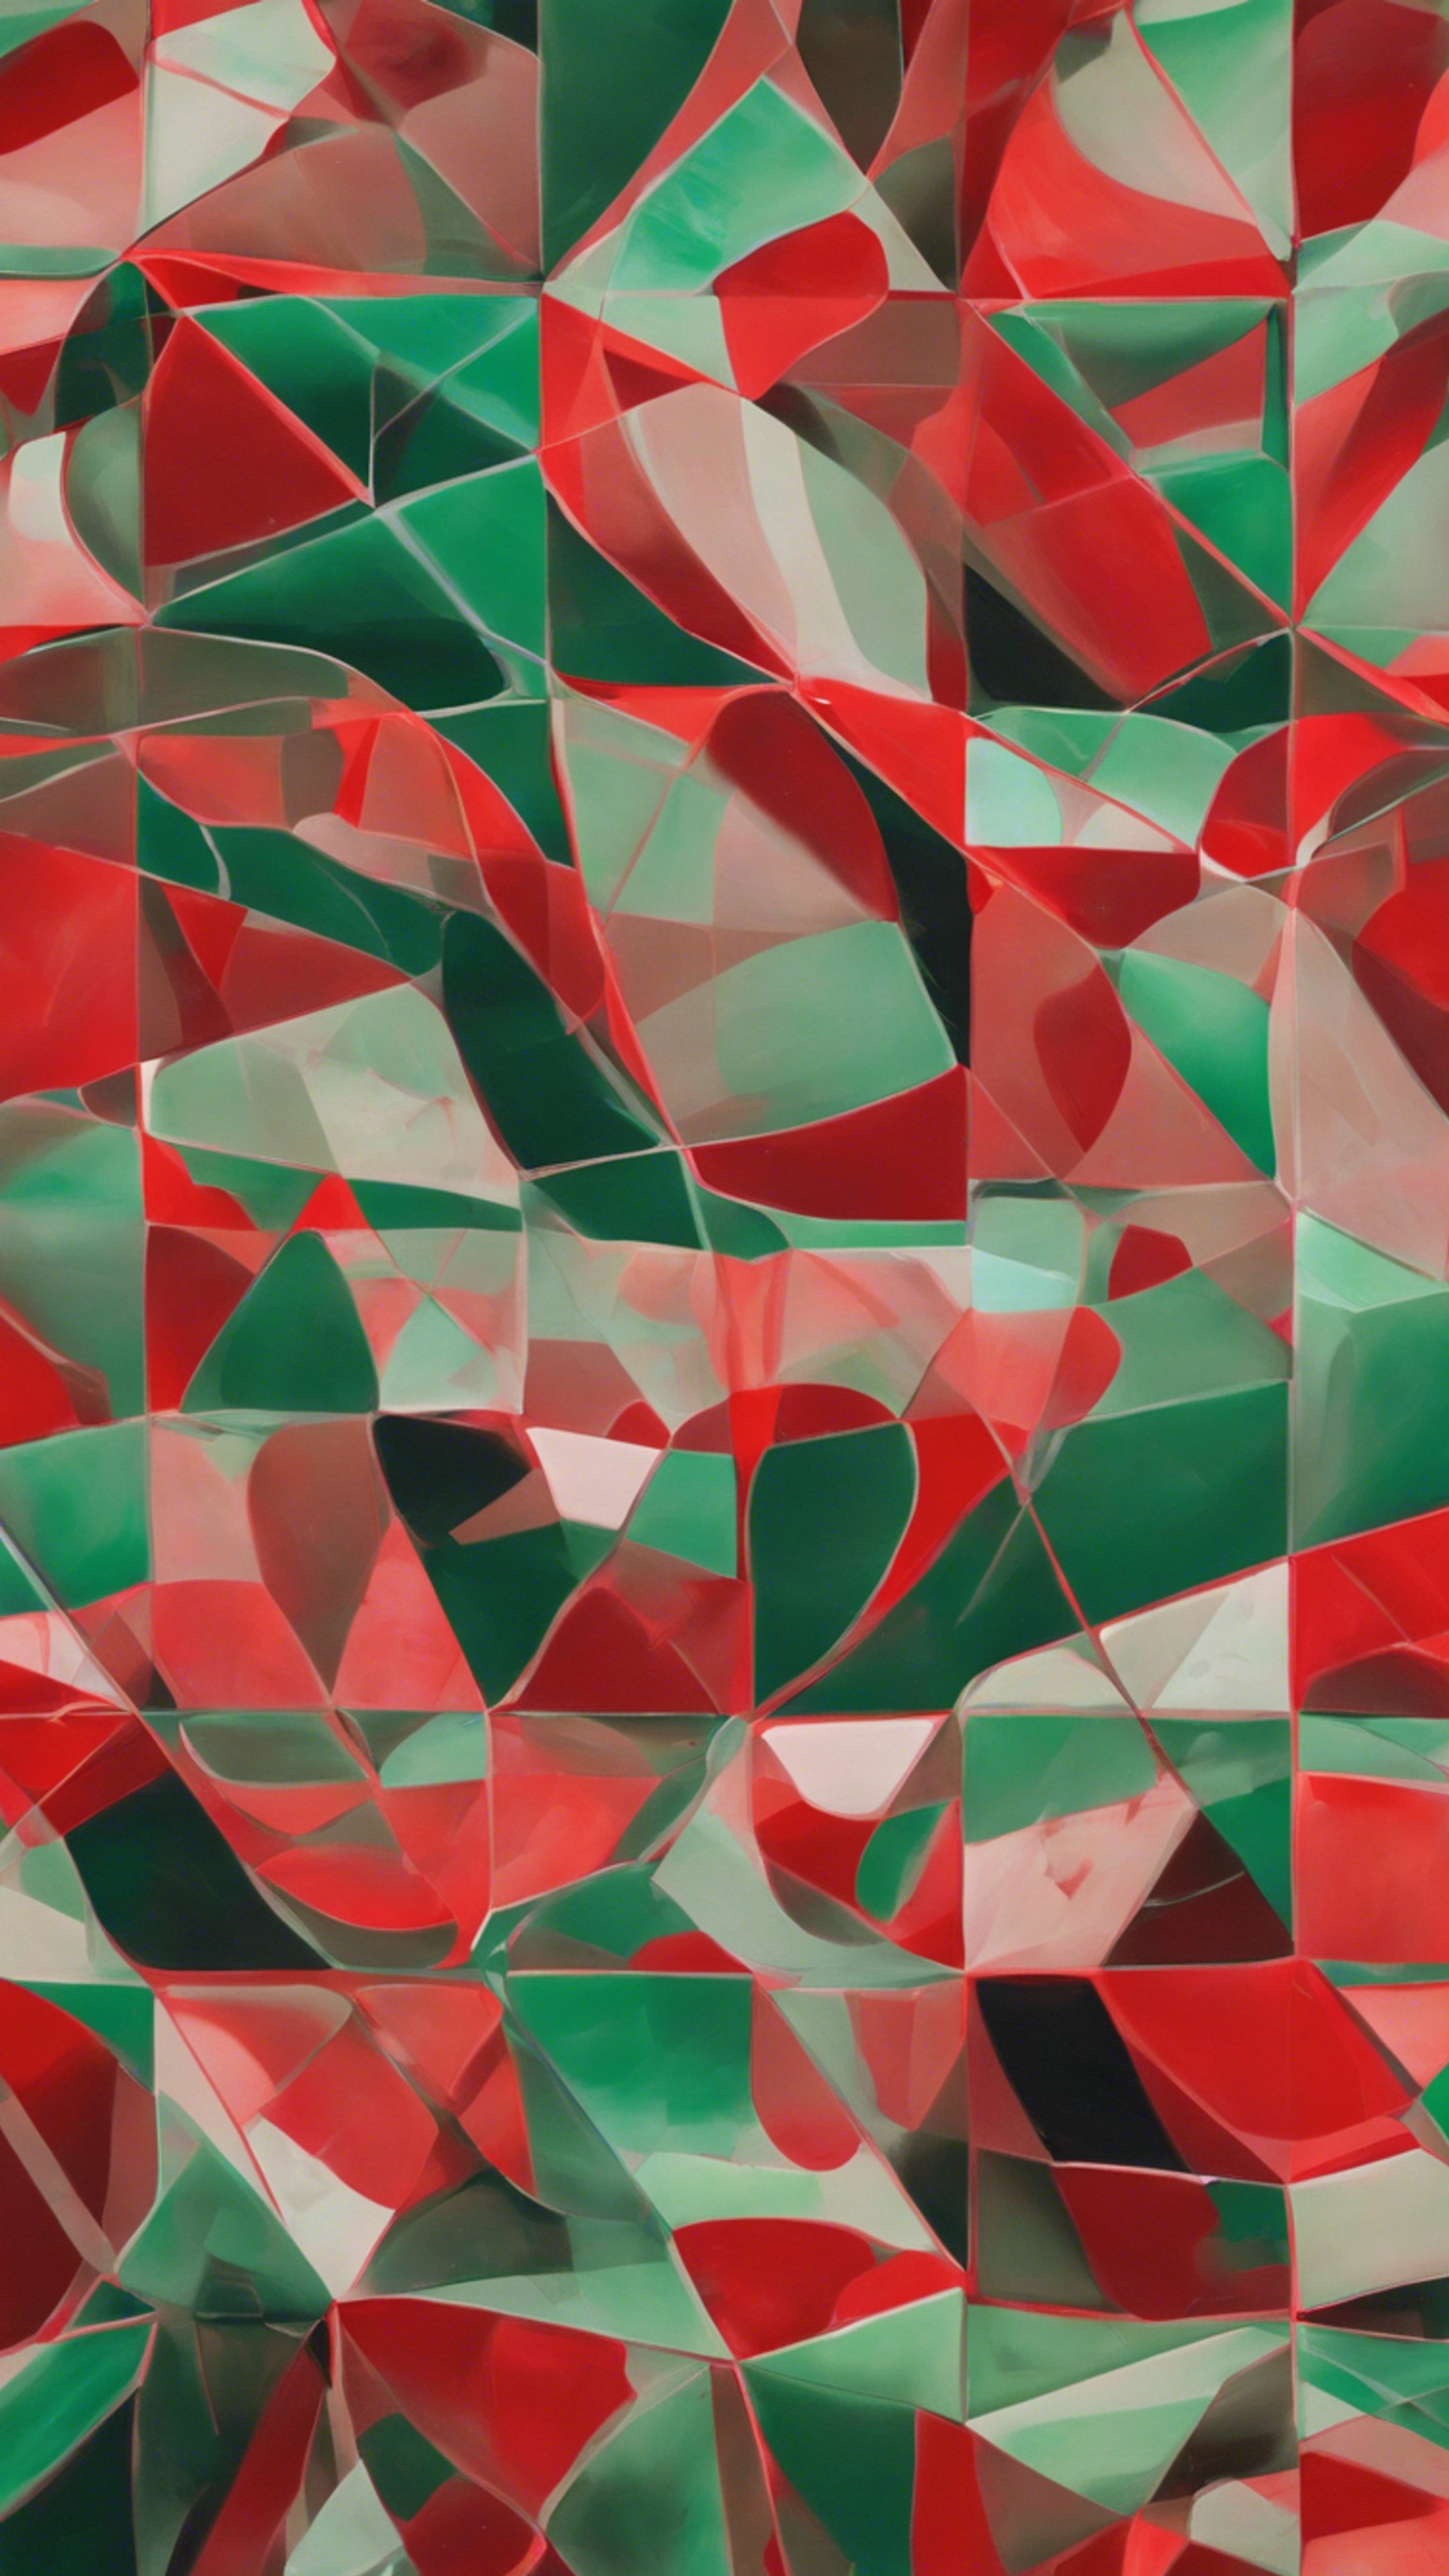 A modernist painting of red and green geometrical shapes, seamless in their connection Дэлгэцийн зураг[cfa3acf637214e6a9239]